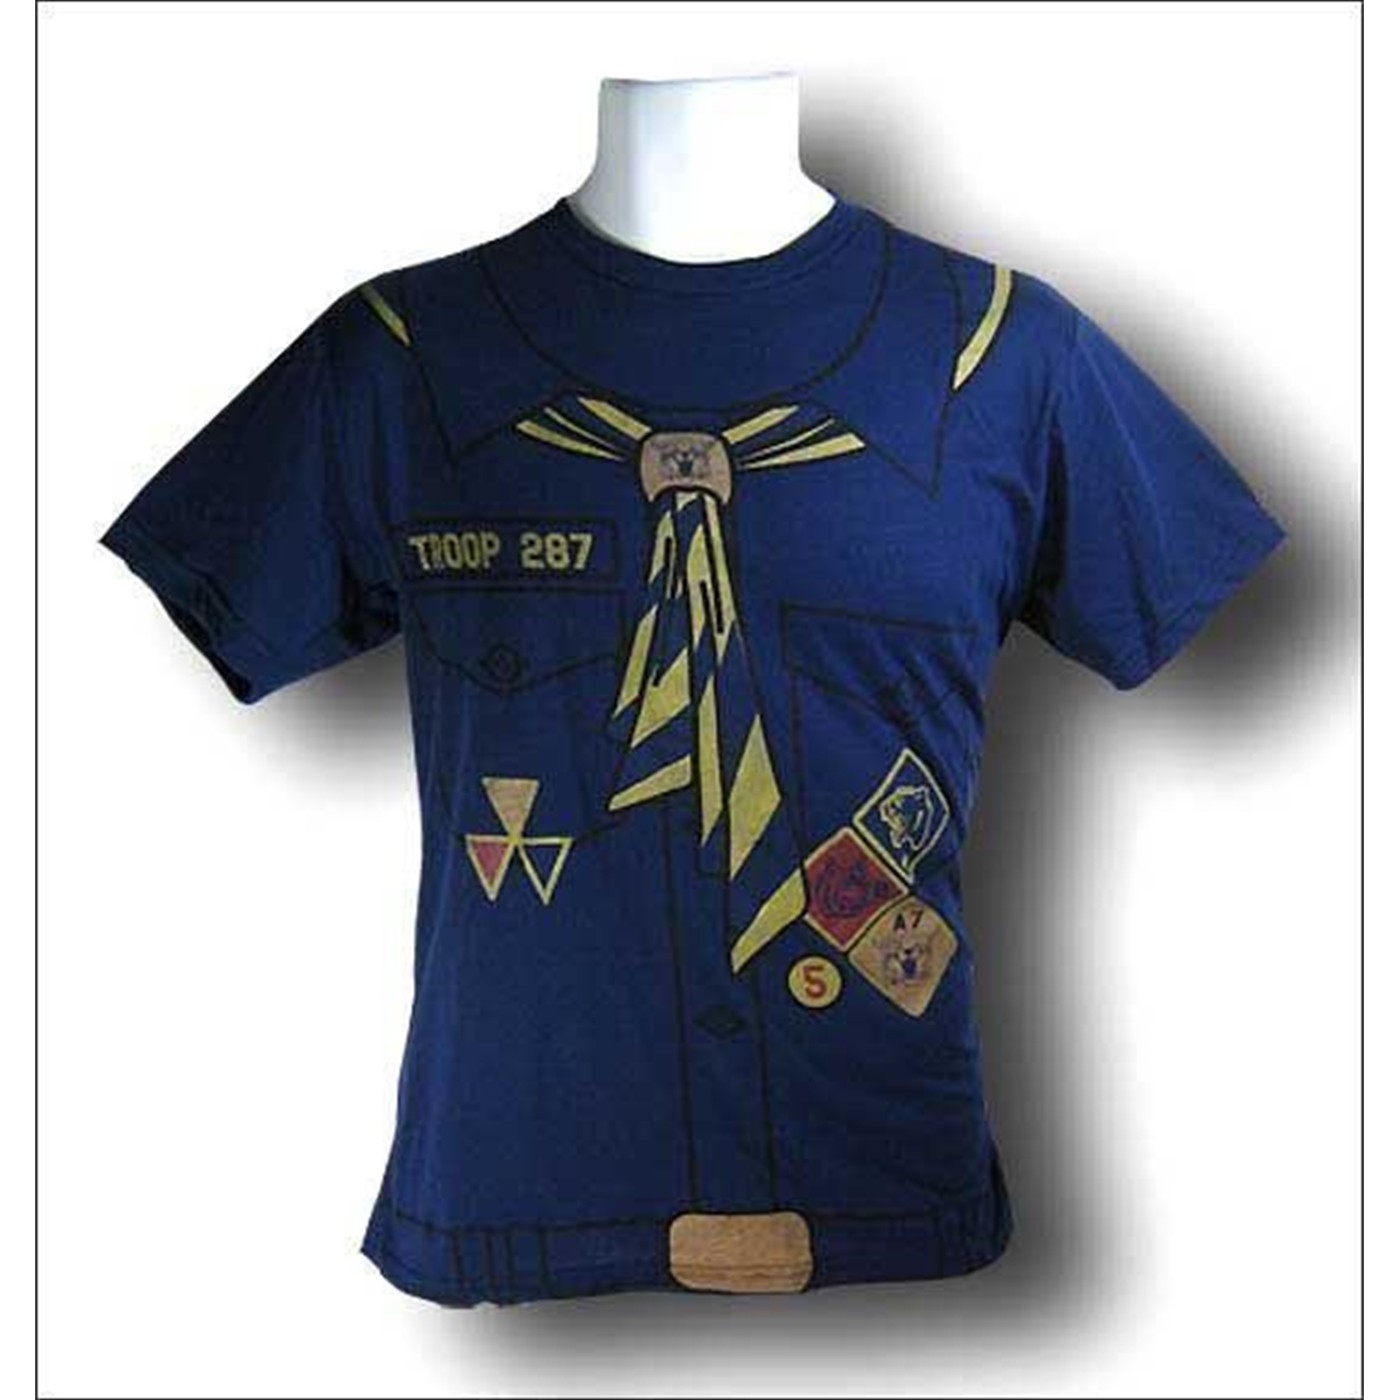 Cub Scout Troop 287 Costume T-Shirt by Junk Food